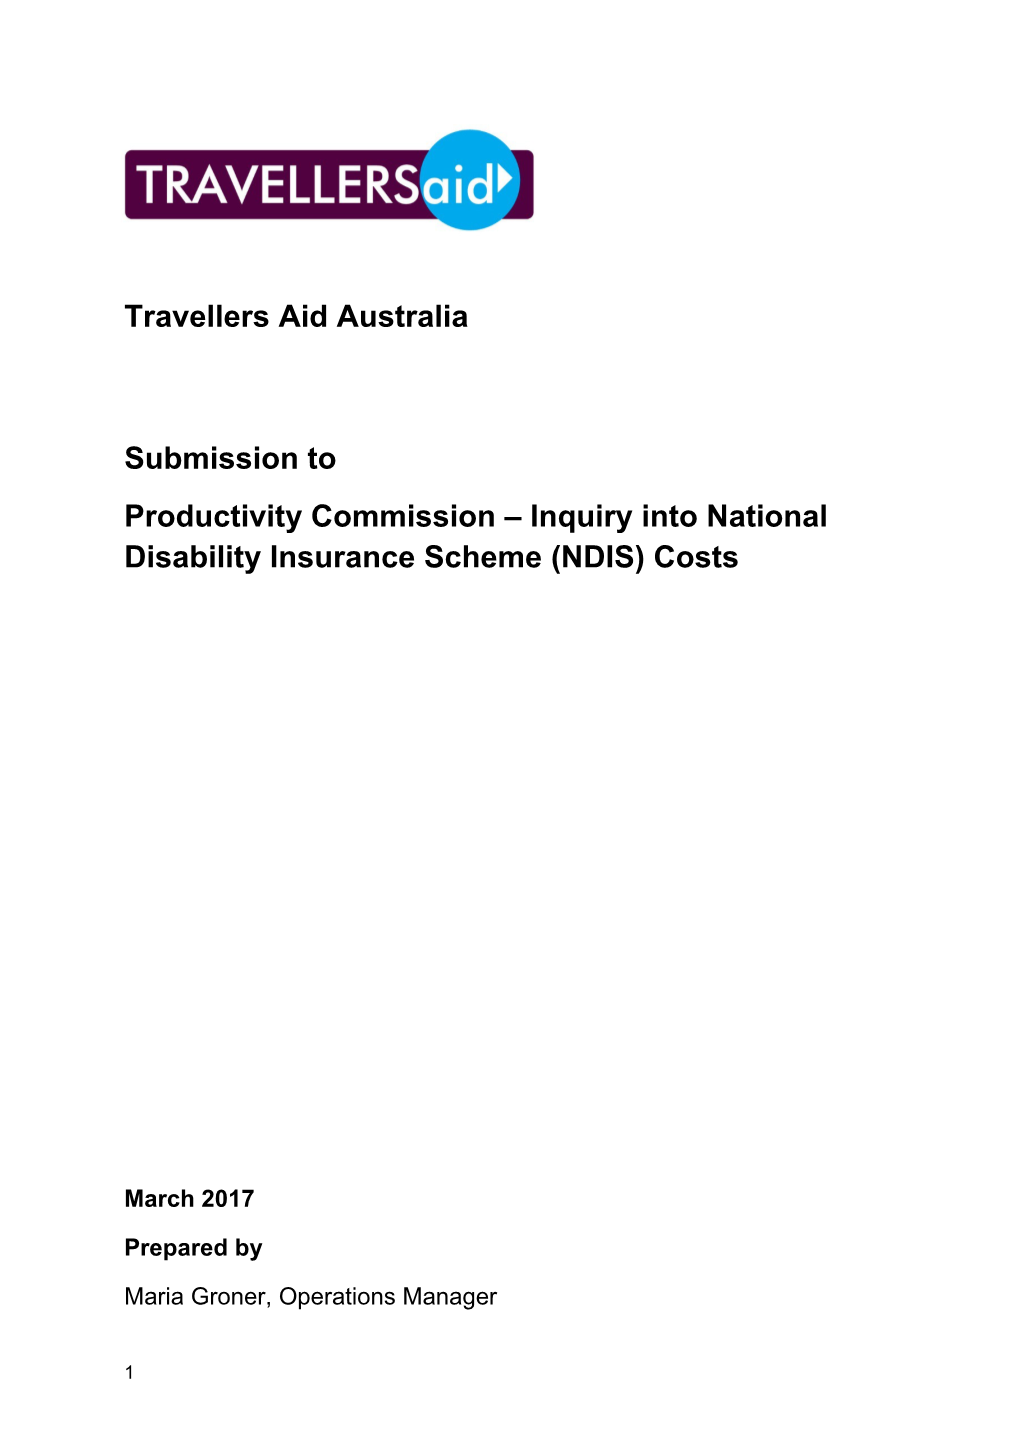 Submission 20 - Travellers Aid Australia (TAA) - National Disability Insurance Scheme (NDIS)